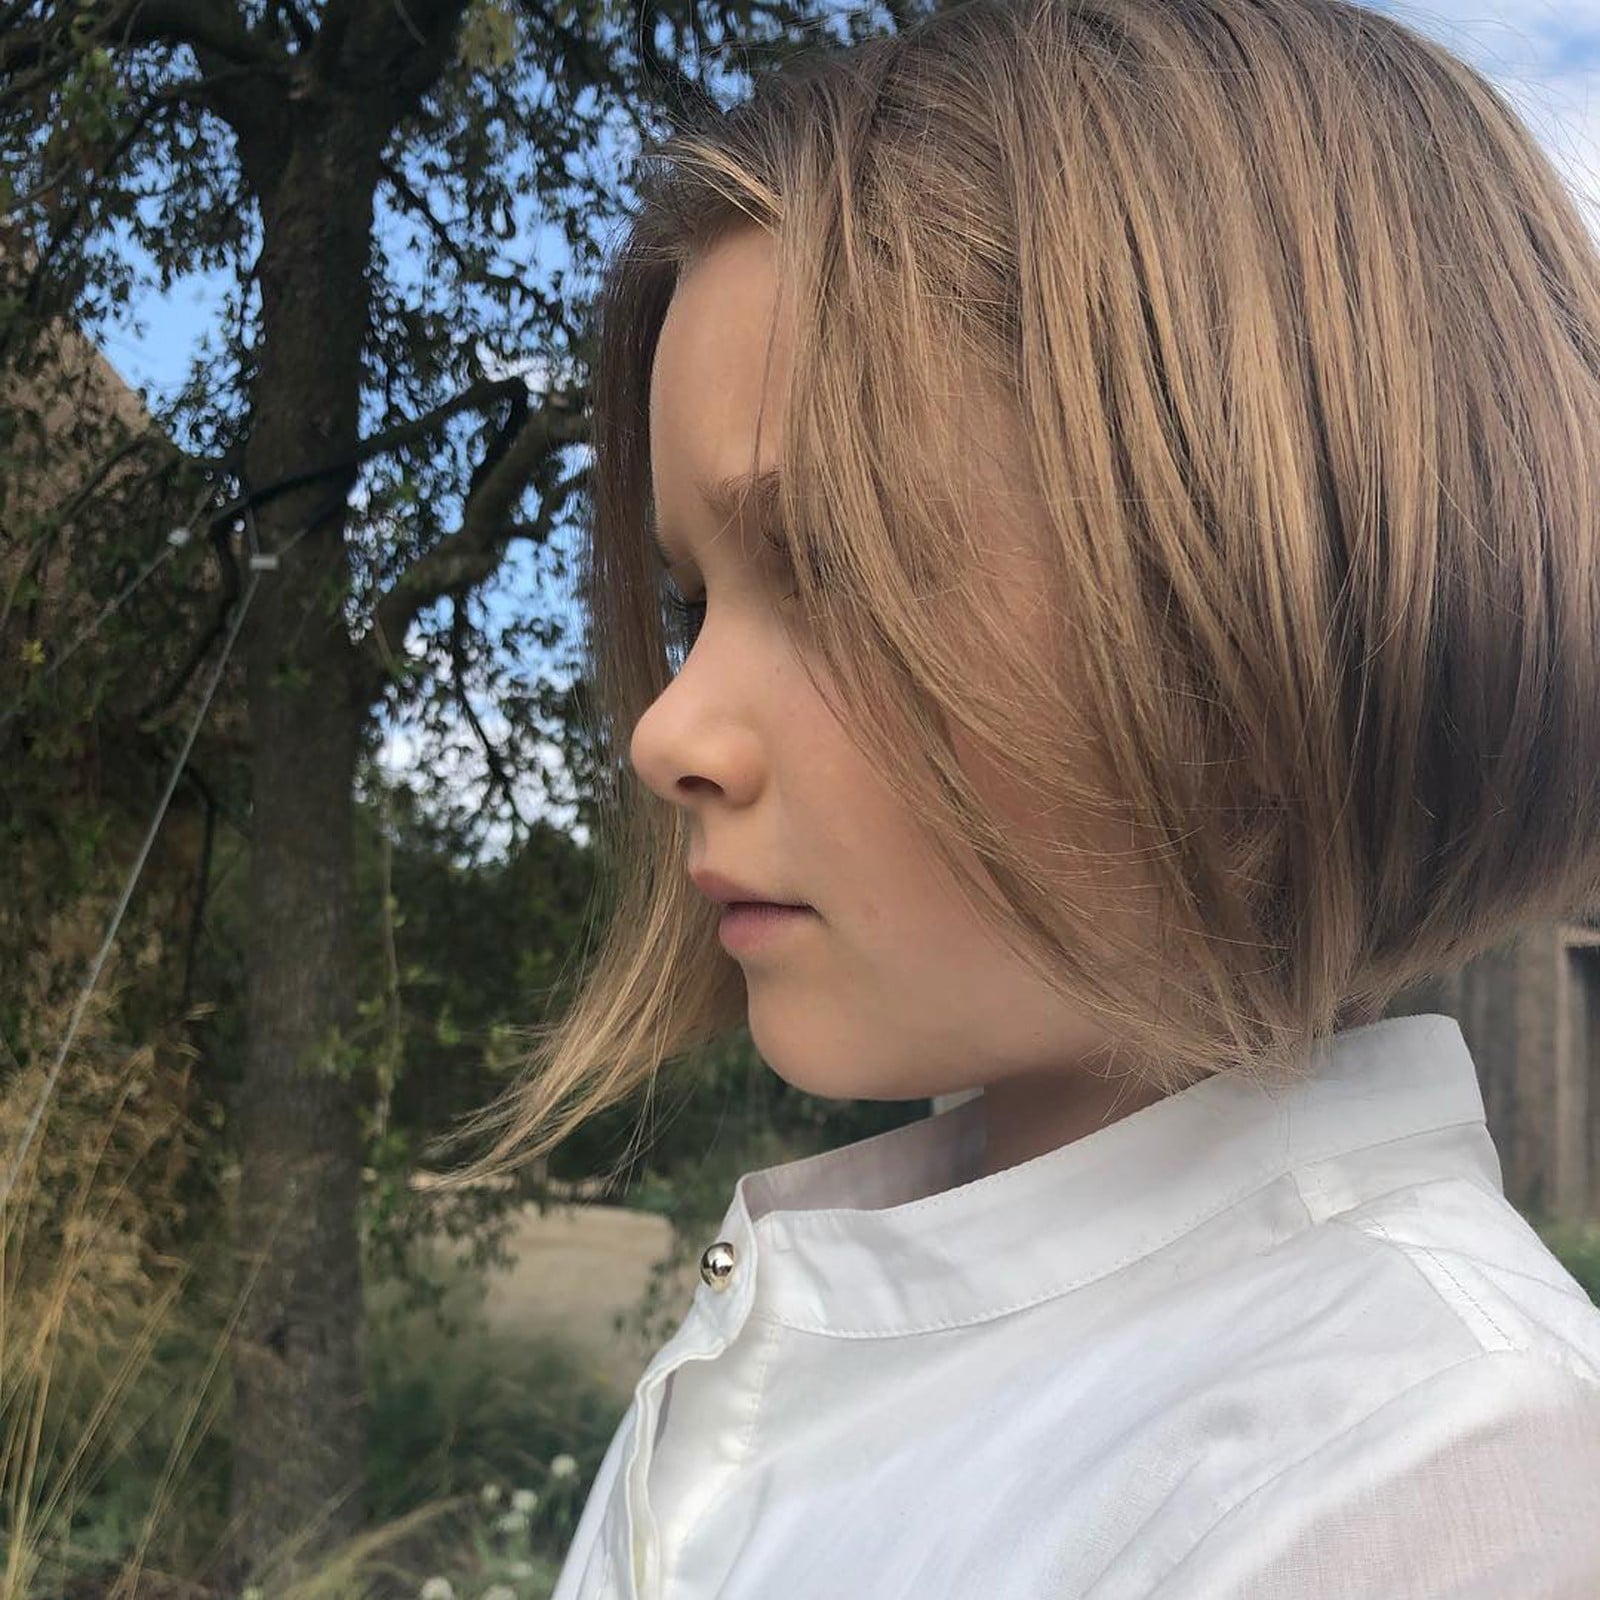 Victoria Beckham's carefree pixie cut with ends upon the nape